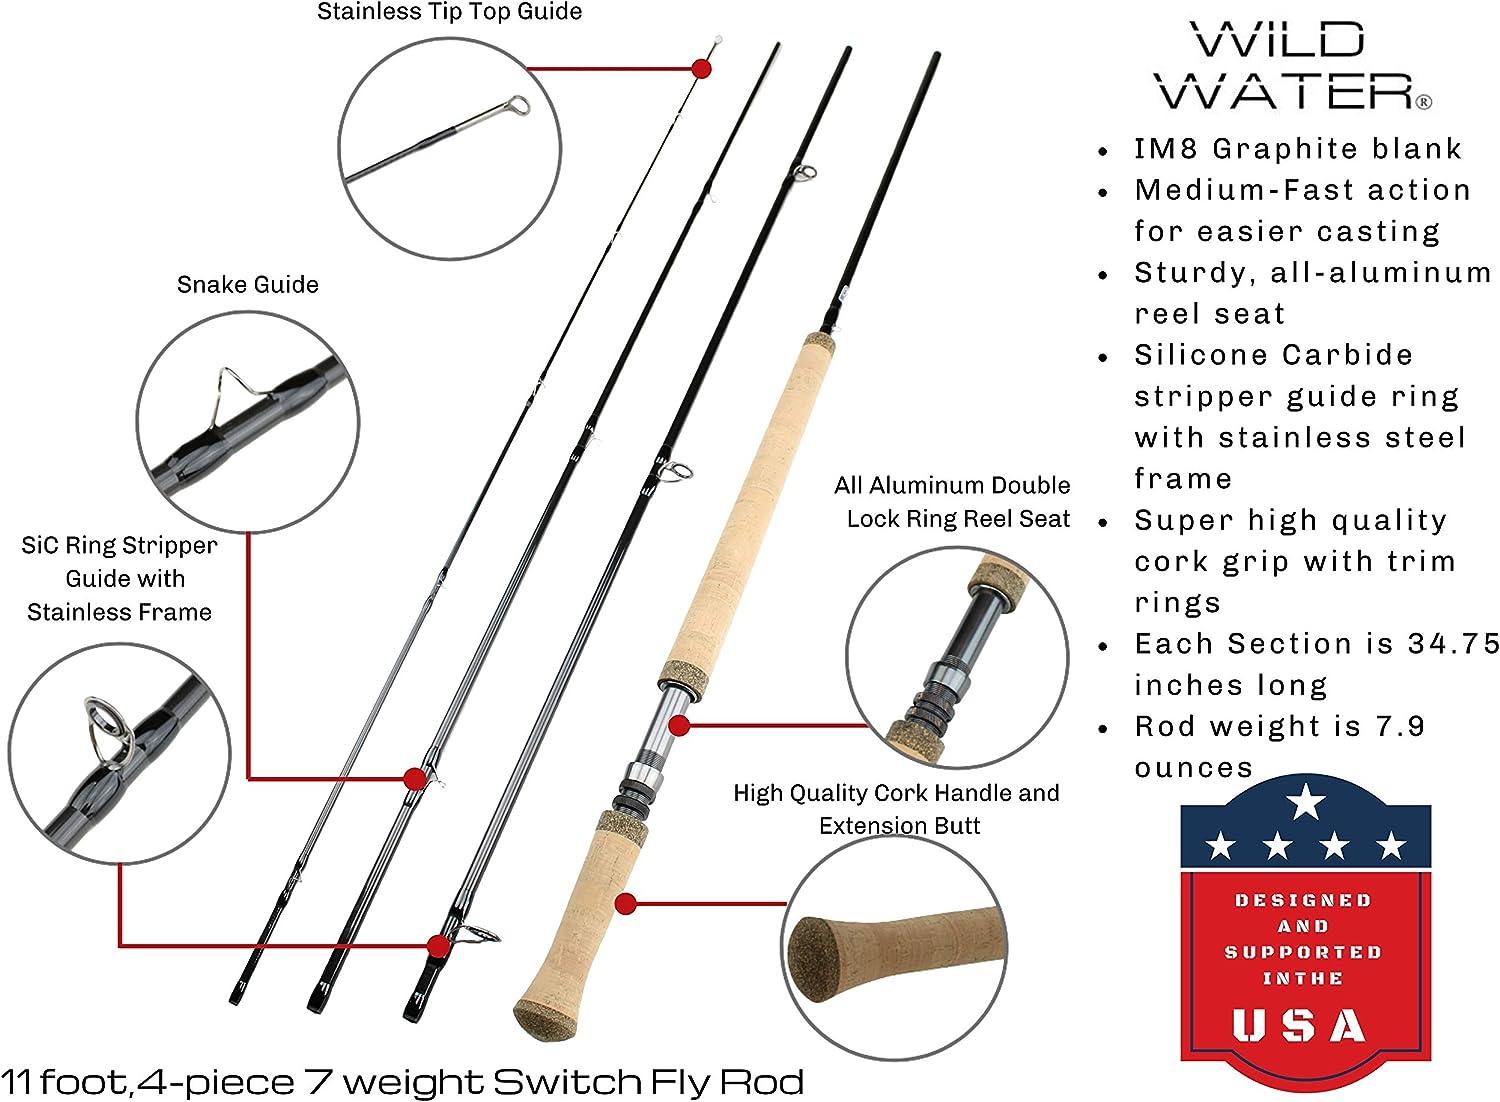 Wild Water Fly Fishing 11 Foot 4-Piece 7-Weight Switch Rod Complete Fly Fishing  Rod and Reel Combo Starter Package for Bass and Pike